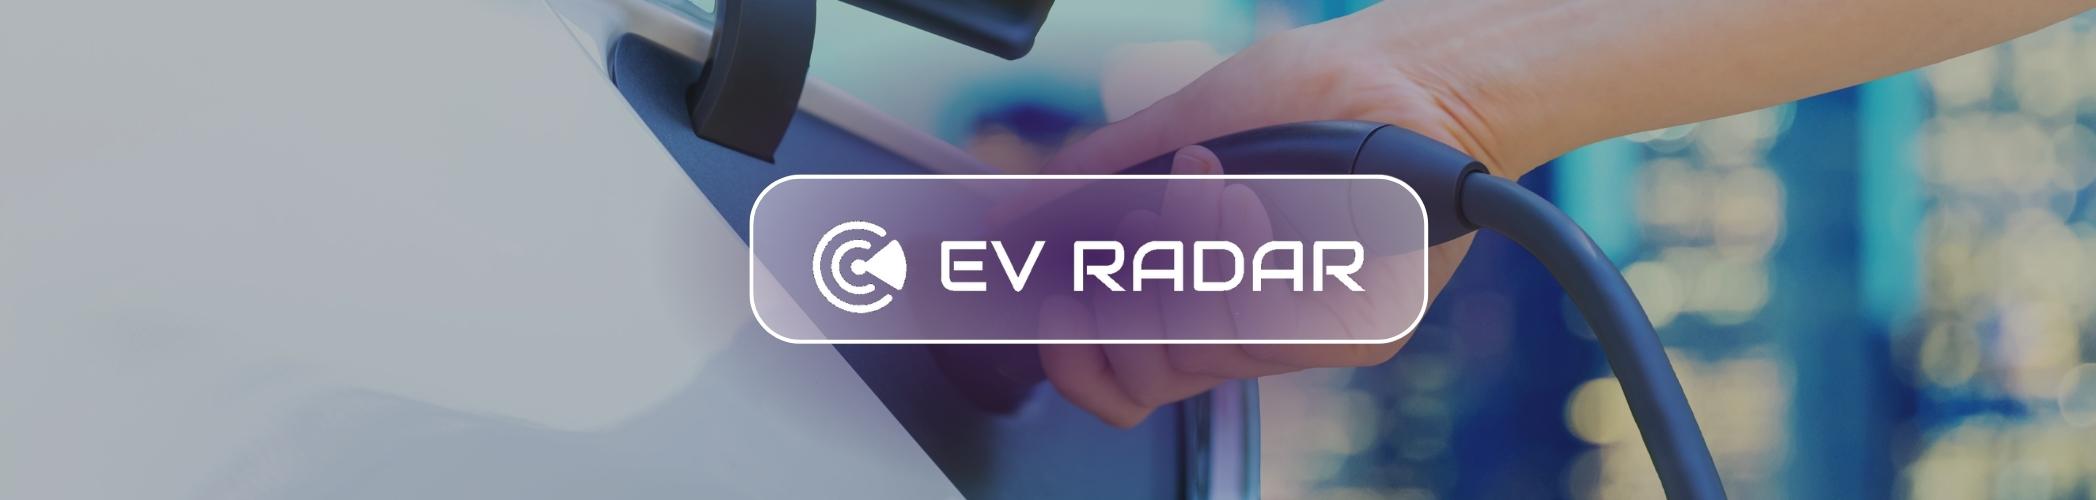 Noodoe EV Radar header banner - Noodoe keeps you well informed for news, education, vehicle announcements, and more from the EV world. We’ll keep you informed.